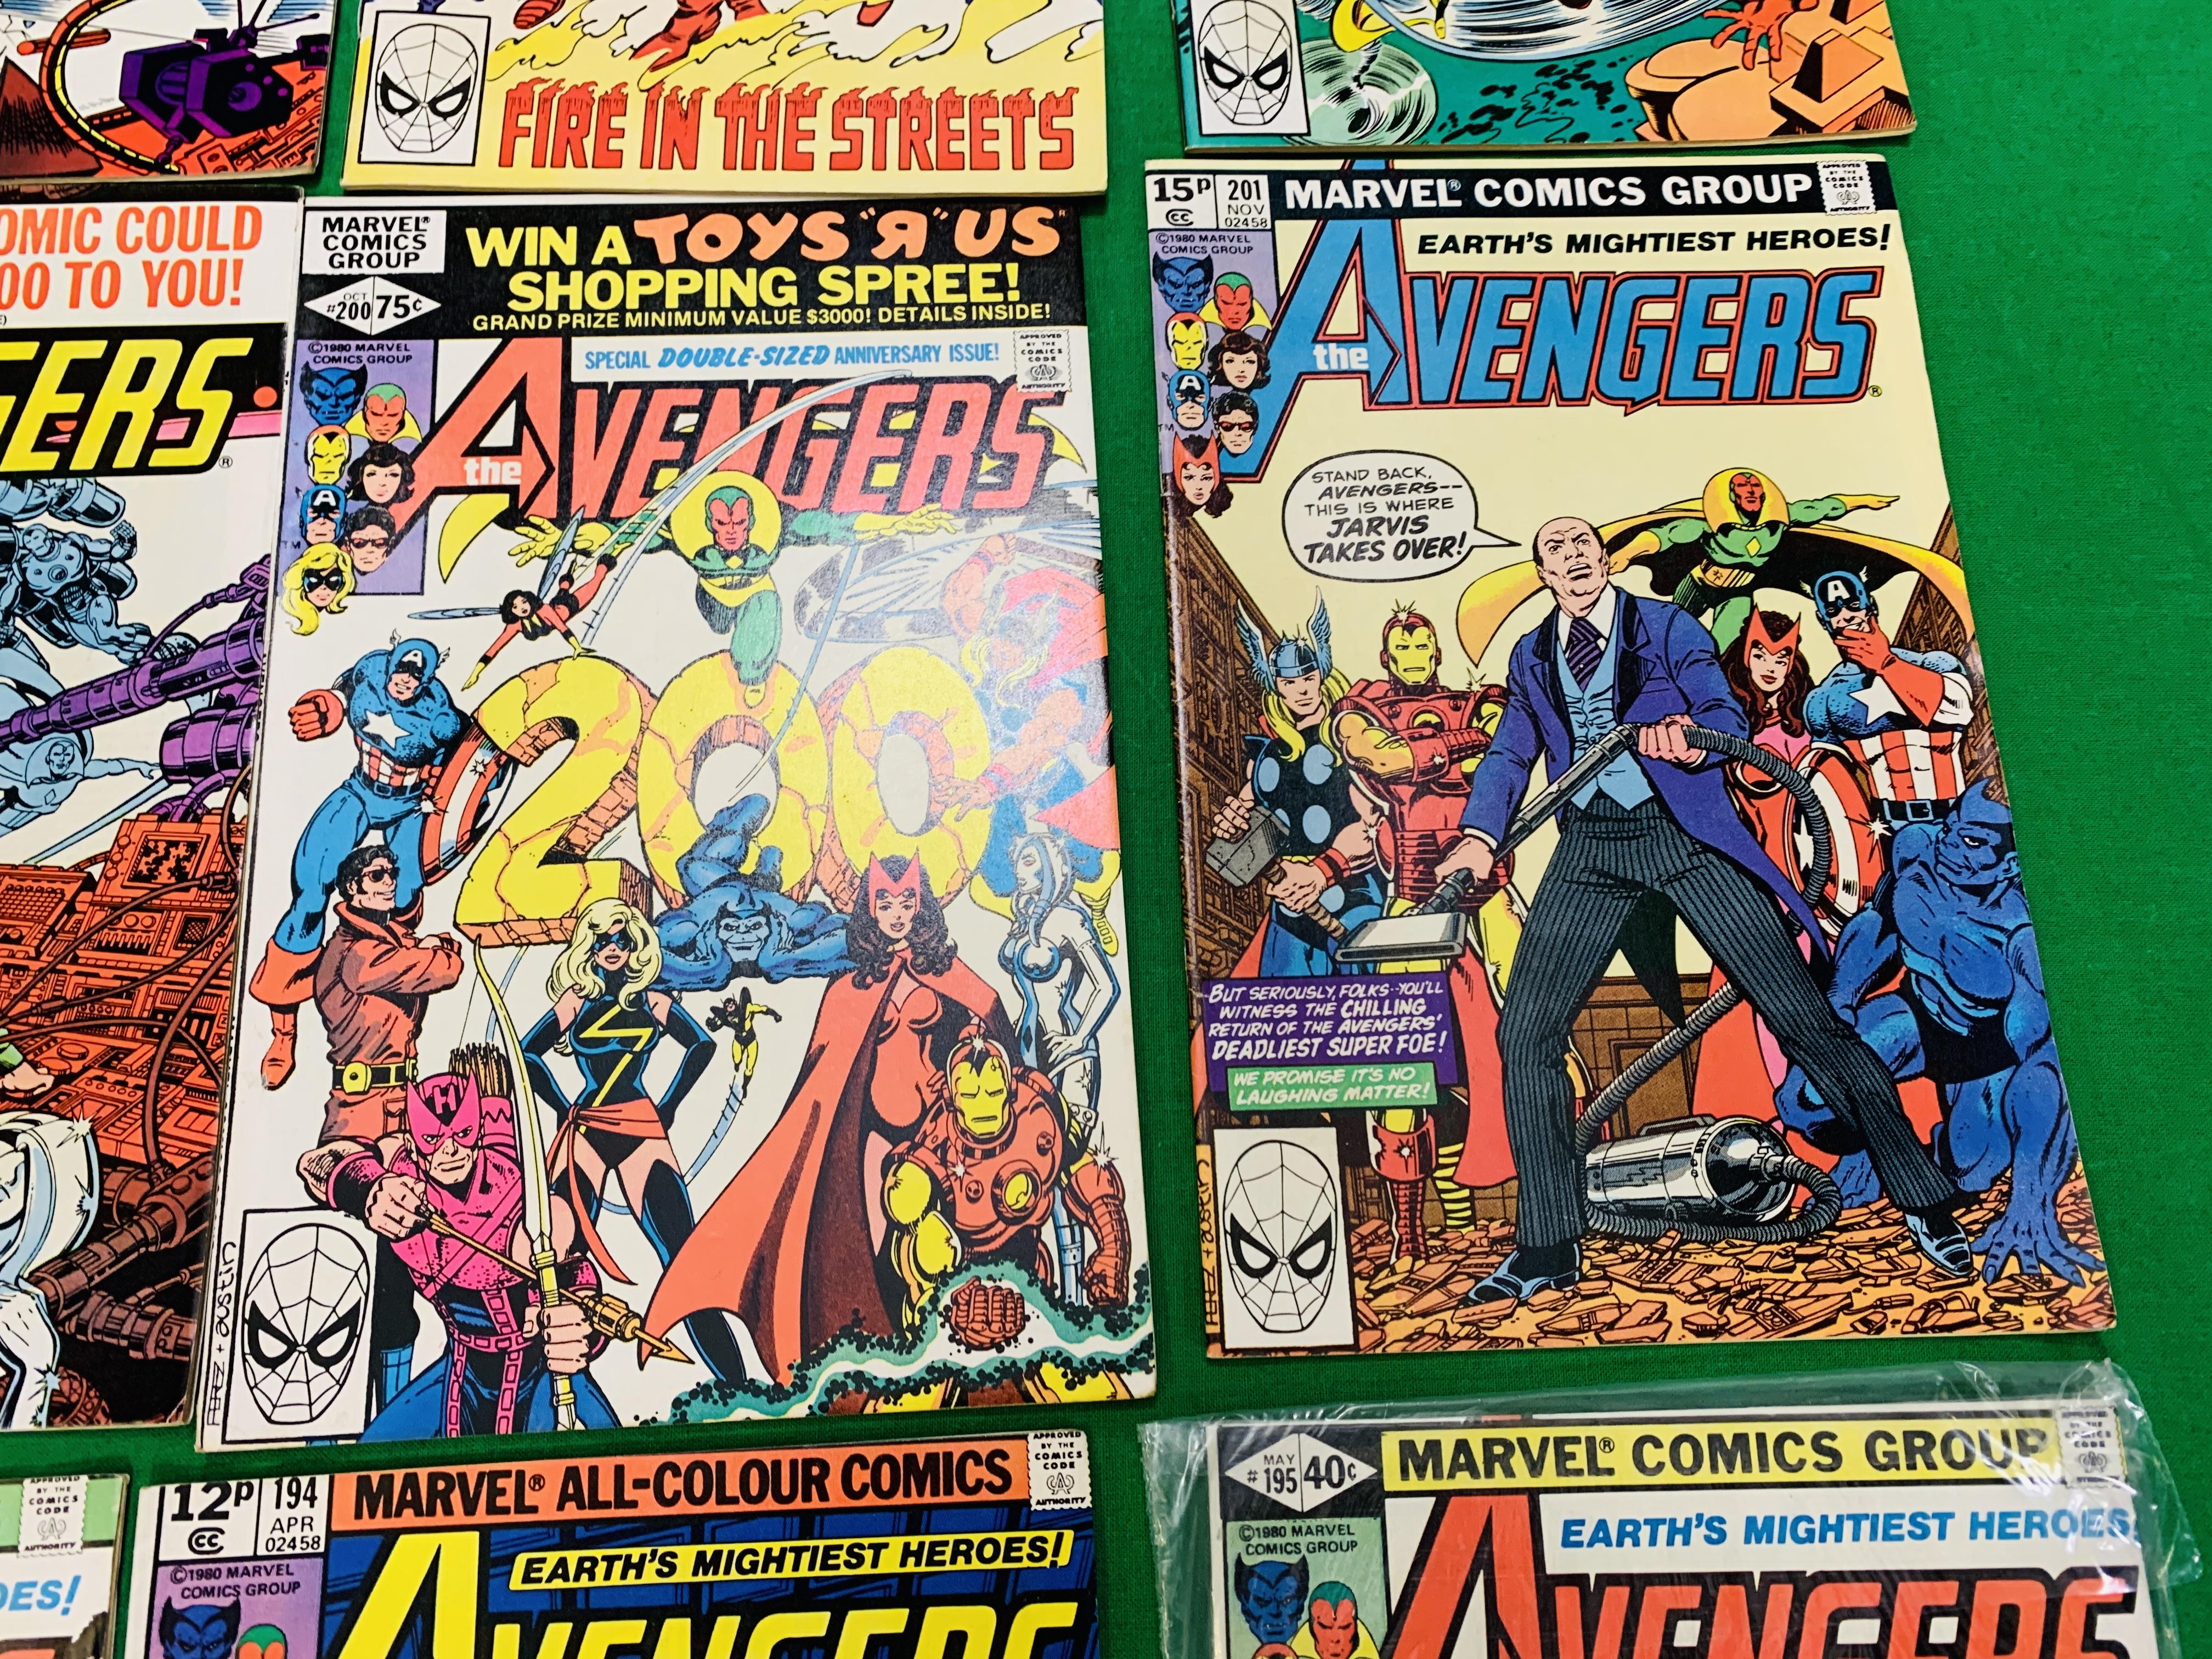 MARVEL COMICS THE AVENGERS NO. 101 - 299, MISSING ISSUES 103 AND 110. - Image 73 of 130